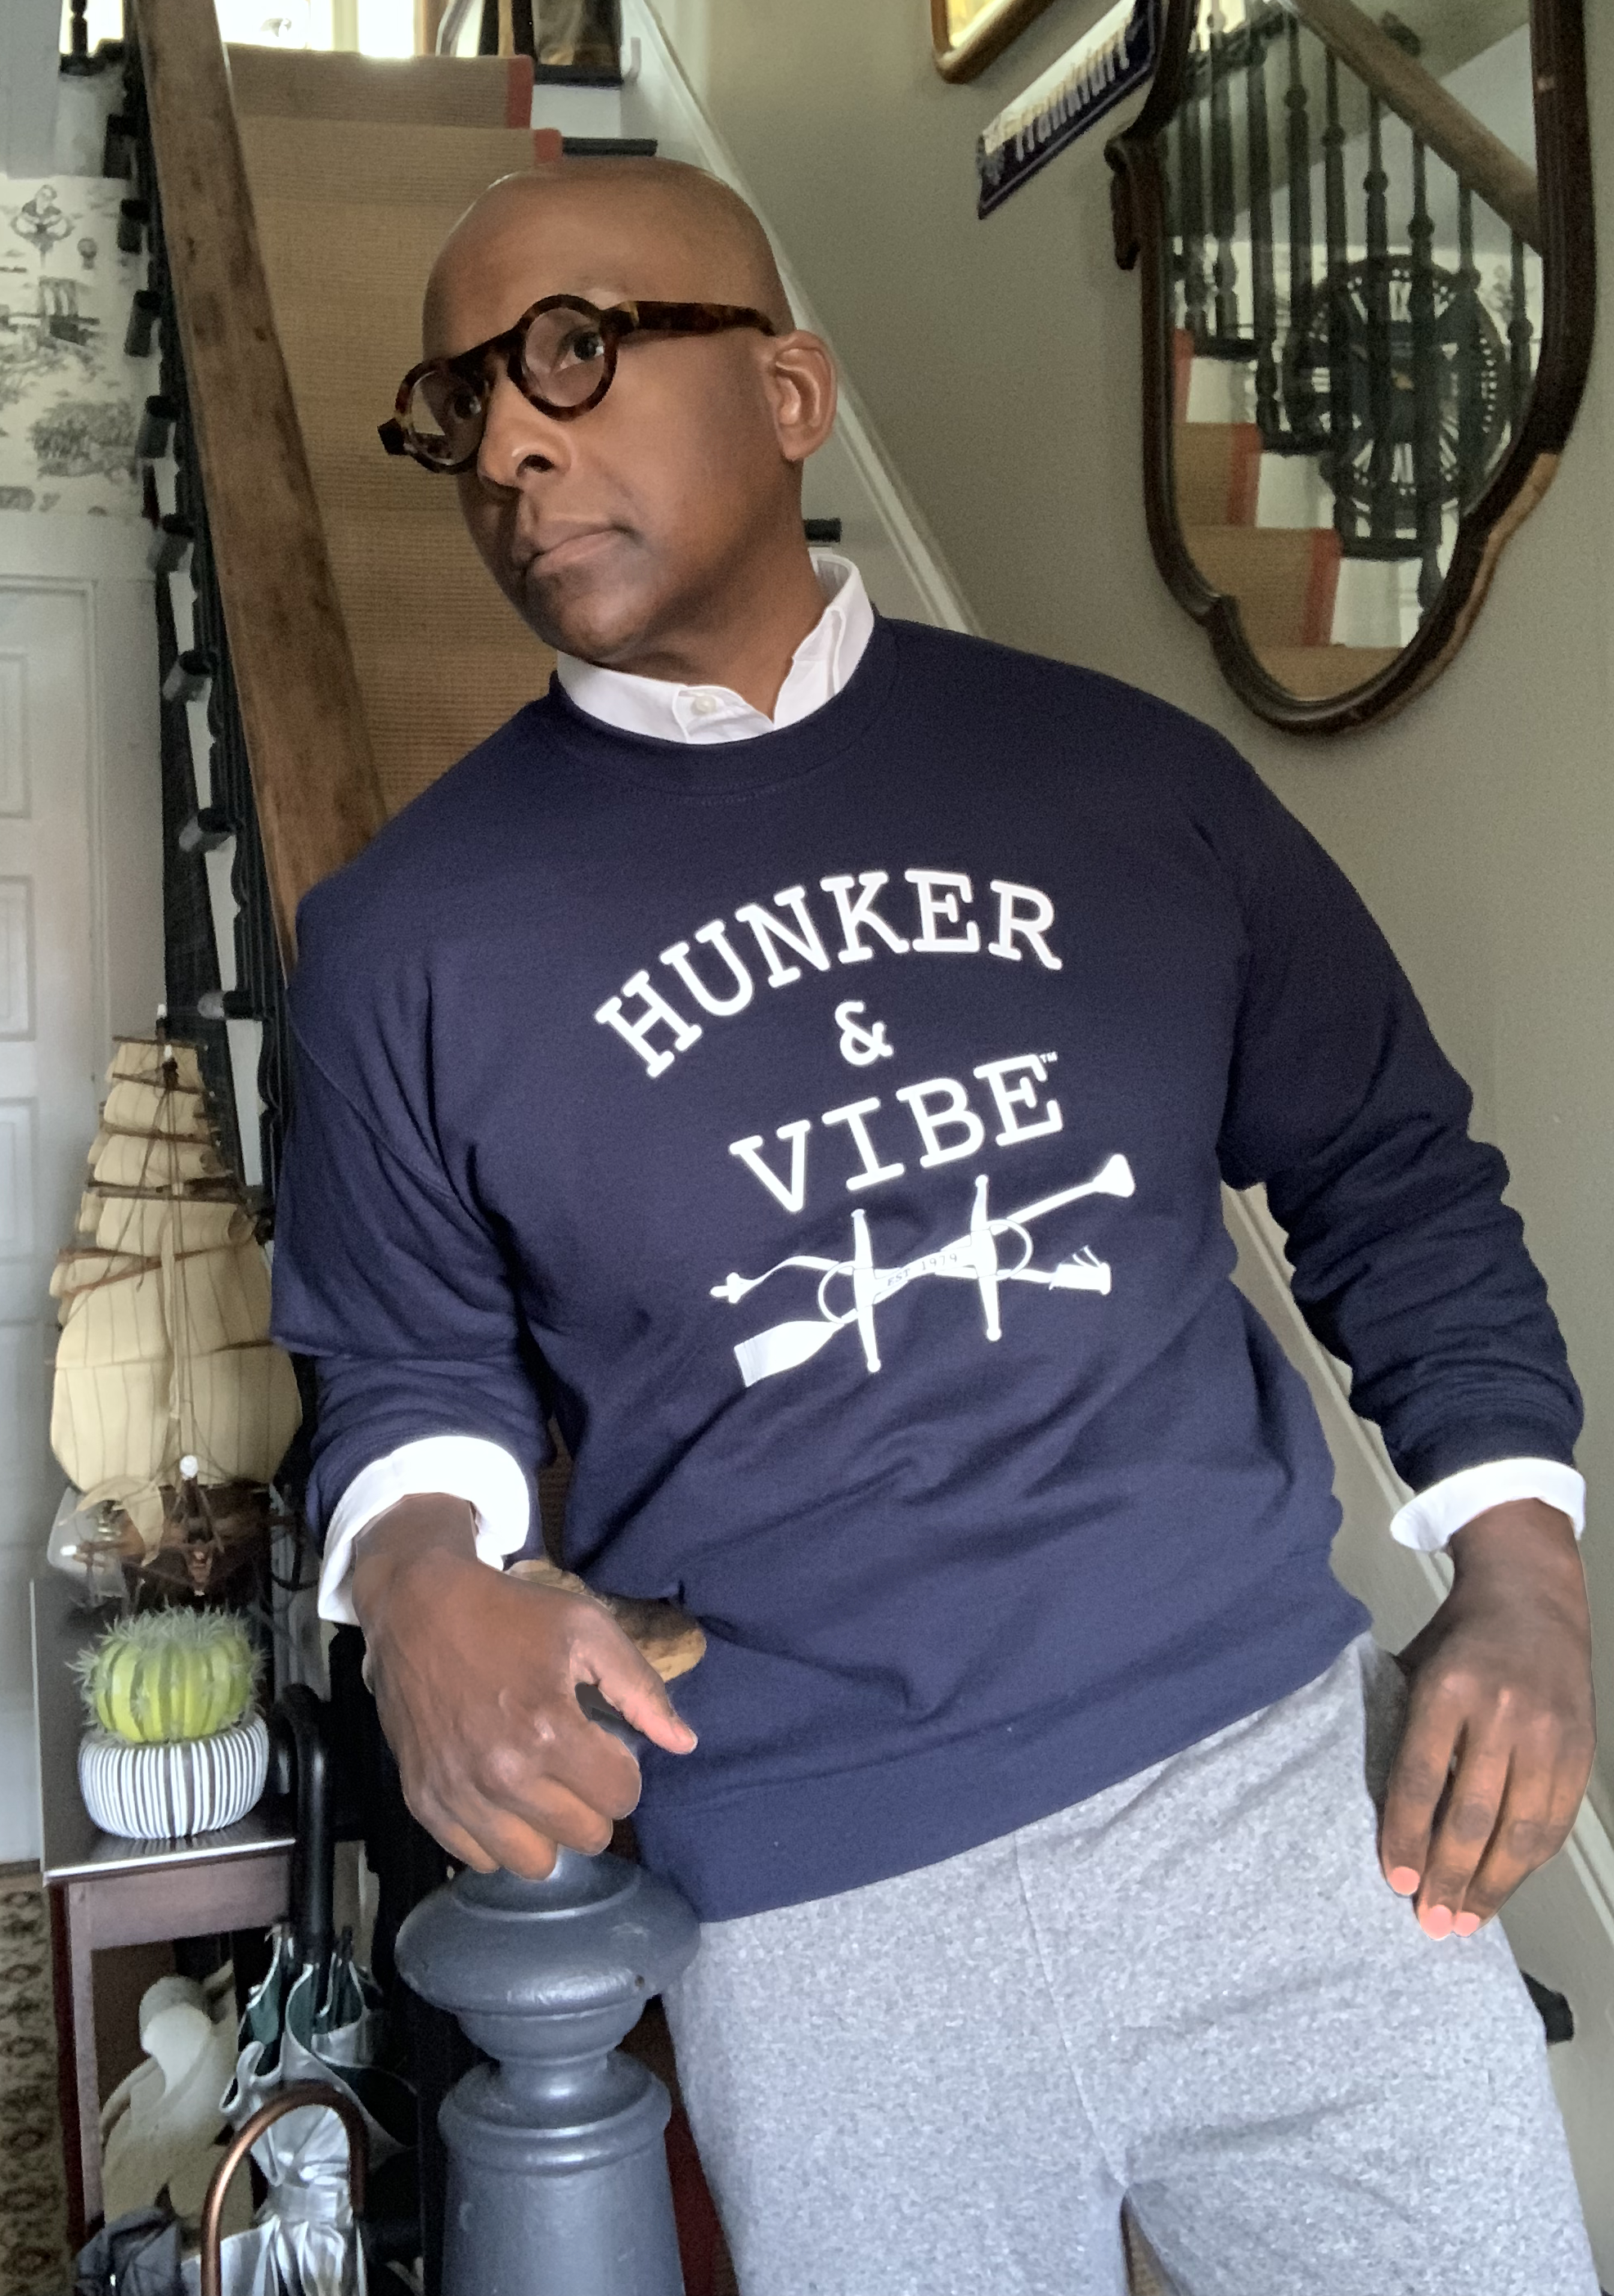 The Hunker & Vibe Boating Crew Neck